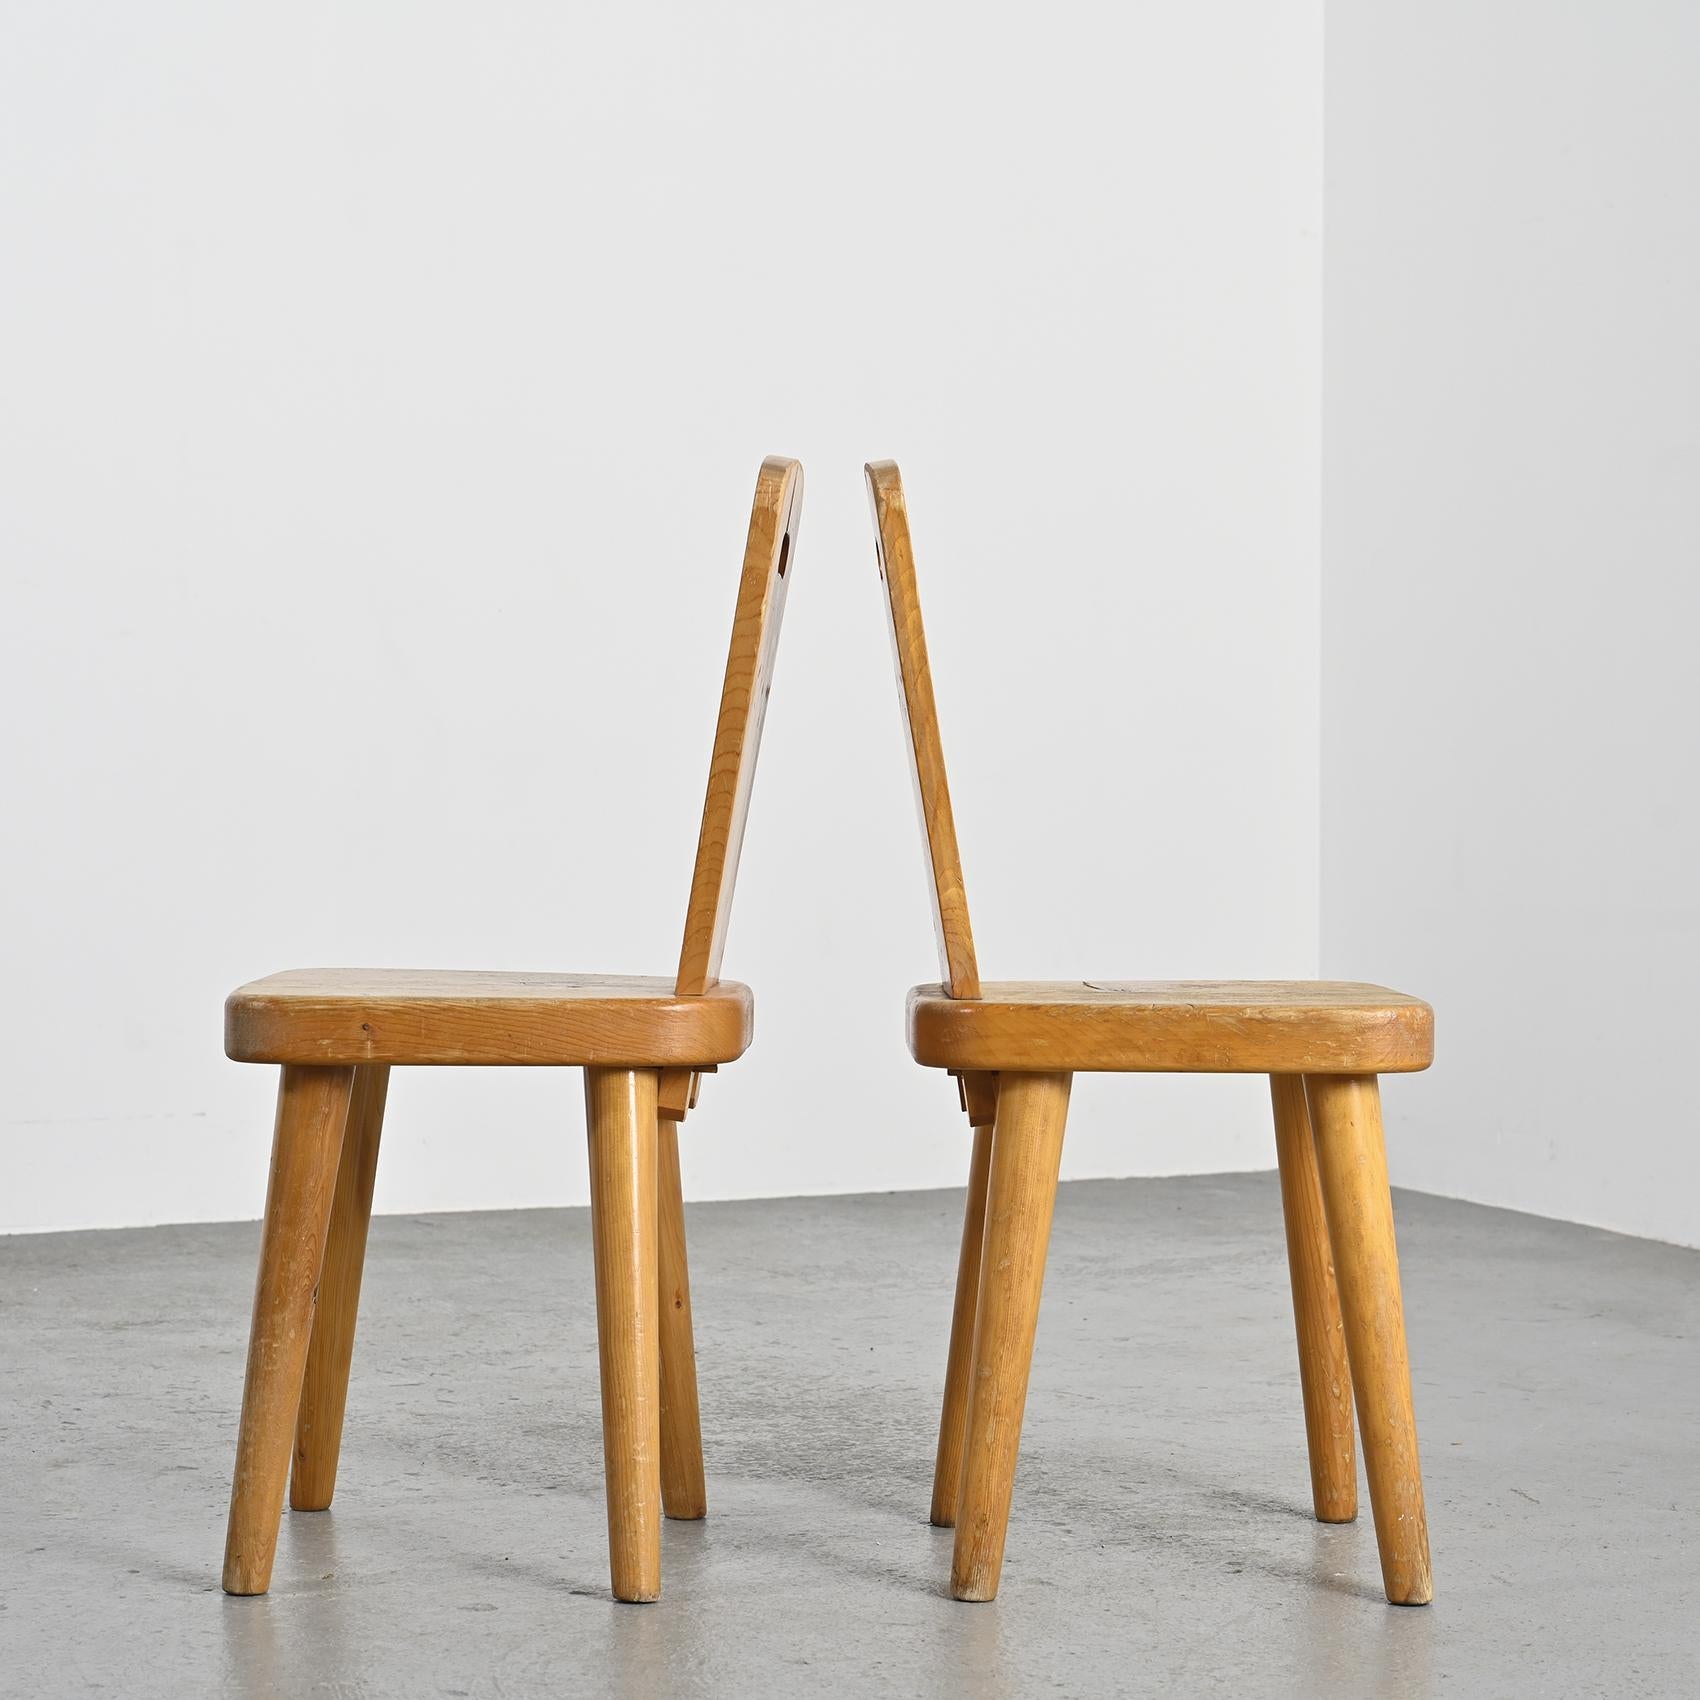 Pair of Chairs by Christian Durupt, Meribel 1960 For Sale 3